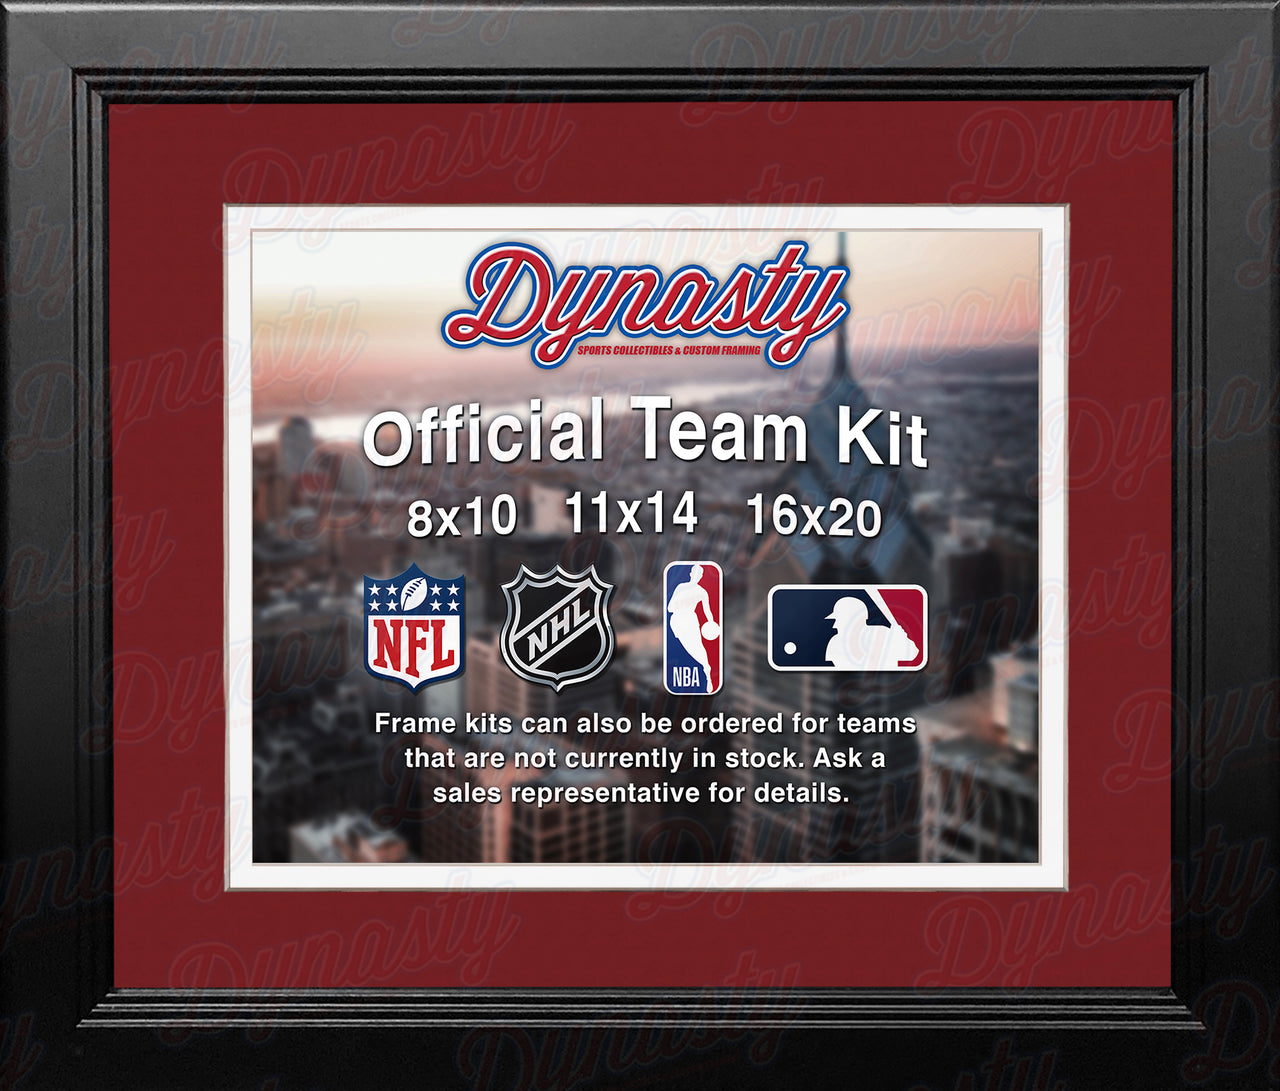 NBA Basketball Photo Picture Frame Kit - Los Angeles Clippers (Red Matting, White Trim) - Dynasty Sports & Framing 